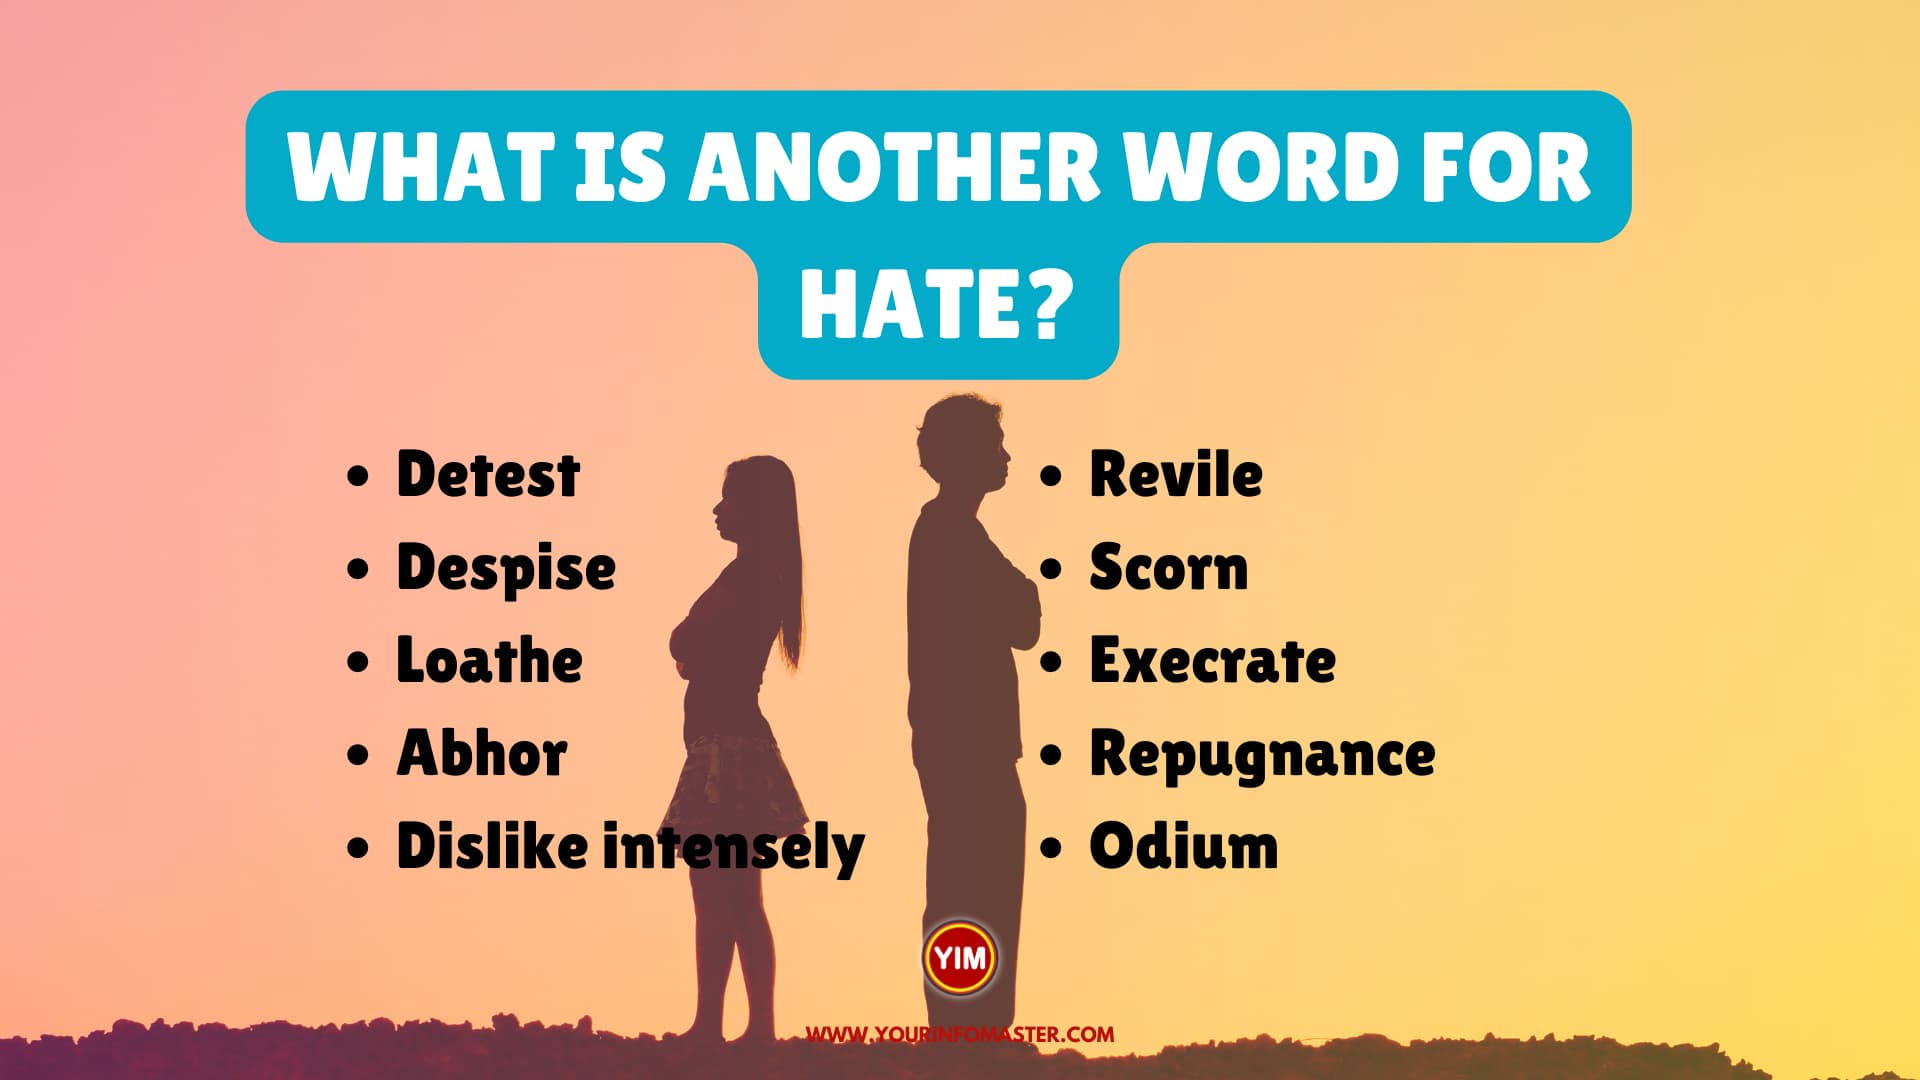 What is another word for Hate